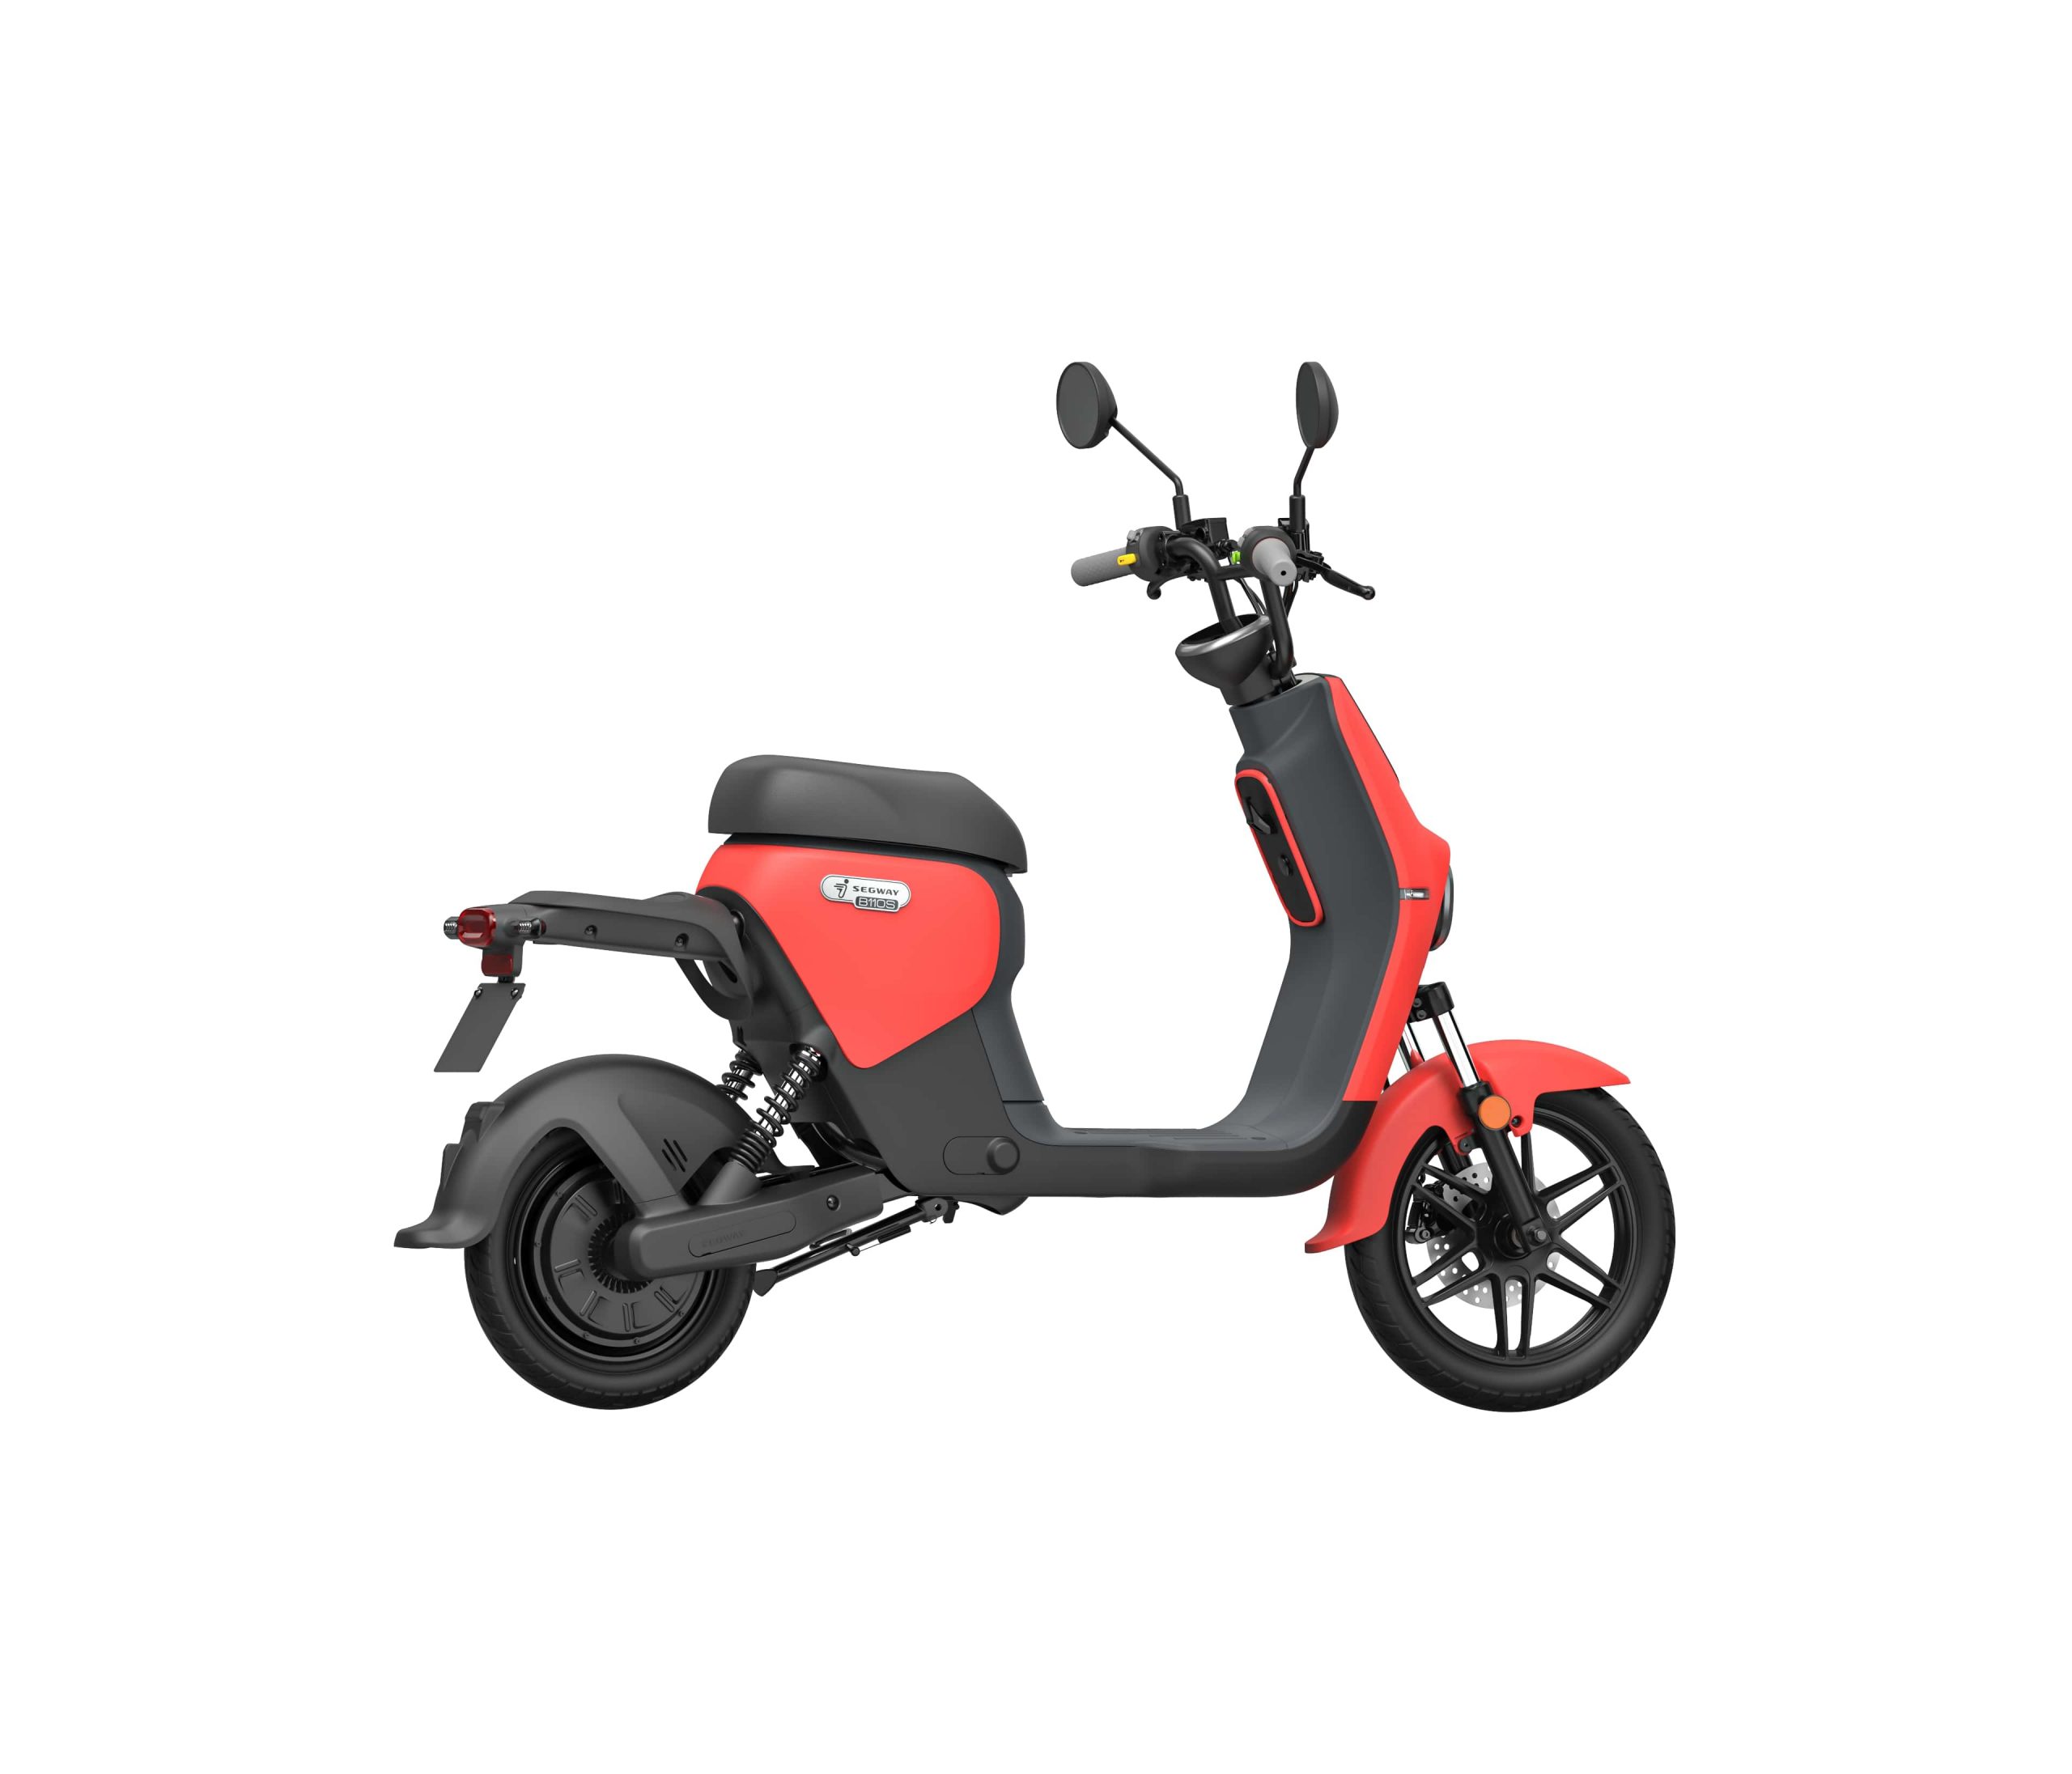  Segway B110S Electric Scooter Red